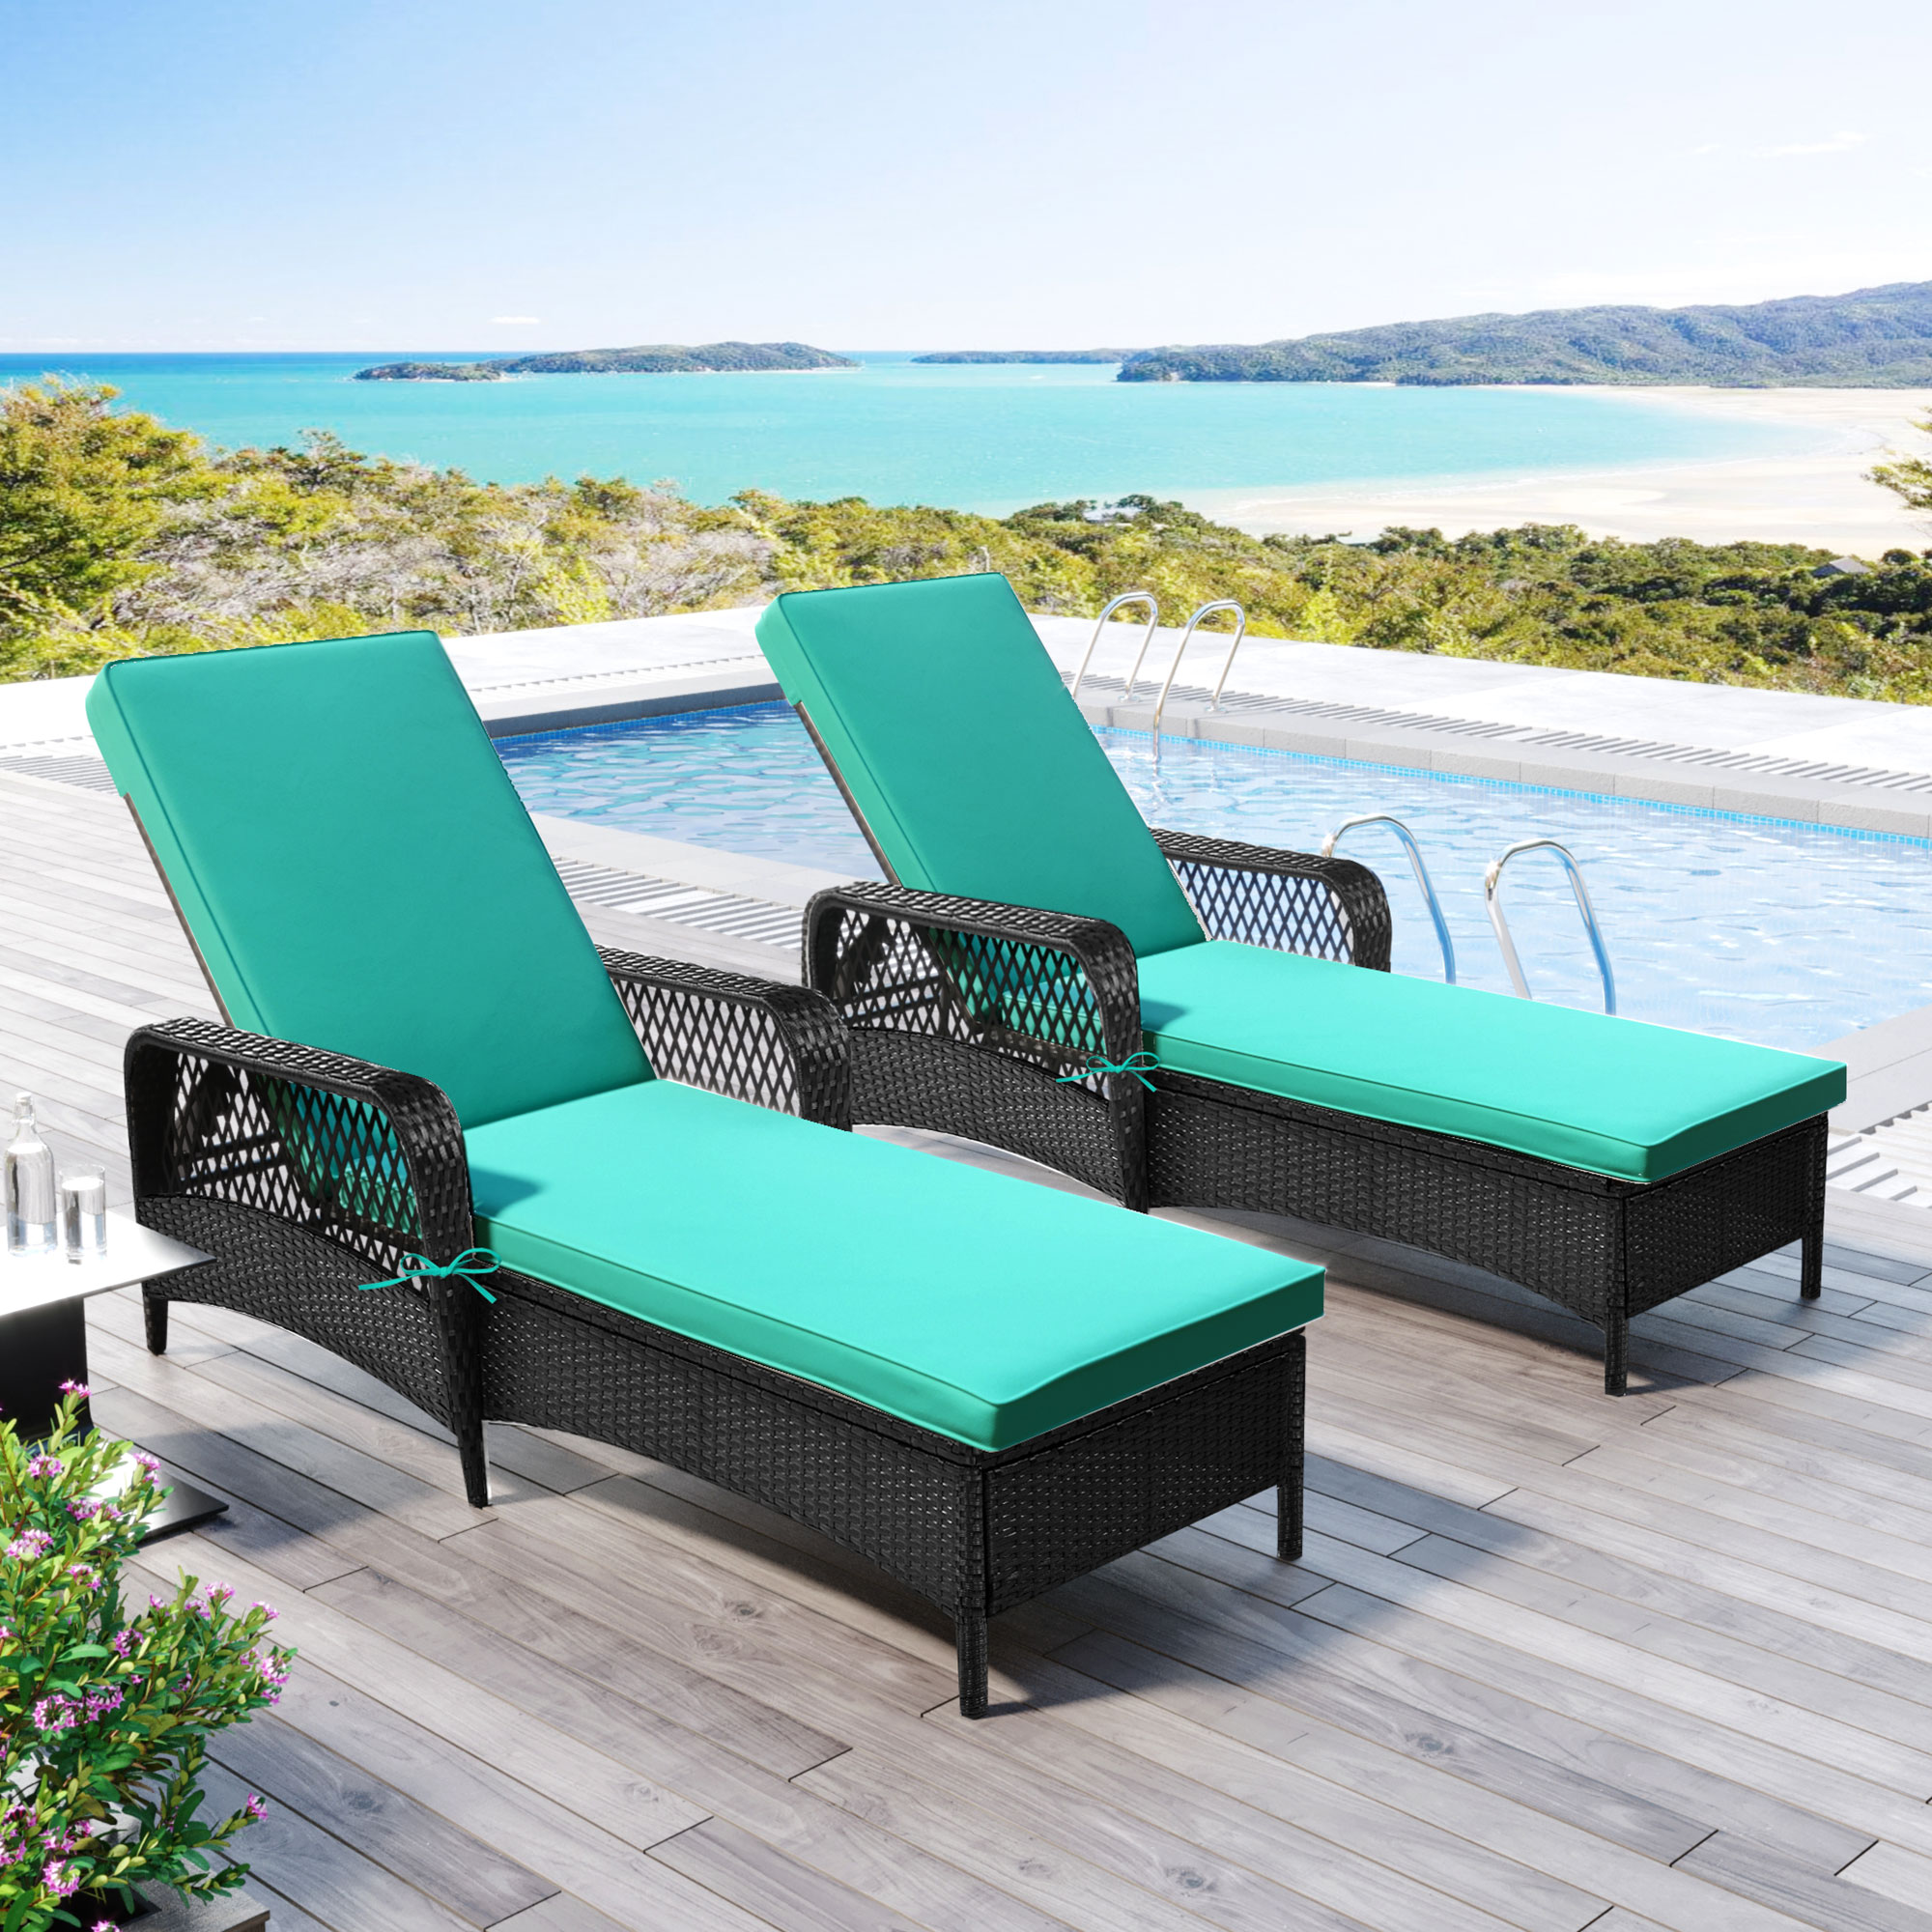 Patio Lounge Chairs Set of 2, Outdoor Chaise Lounges Chairs with 6 Backrest Angles, and Removable Cushions, PE Rattan Backrest Lounger Chairs Set for Pool Porch Backyard Patio, K2693 - image 2 of 10